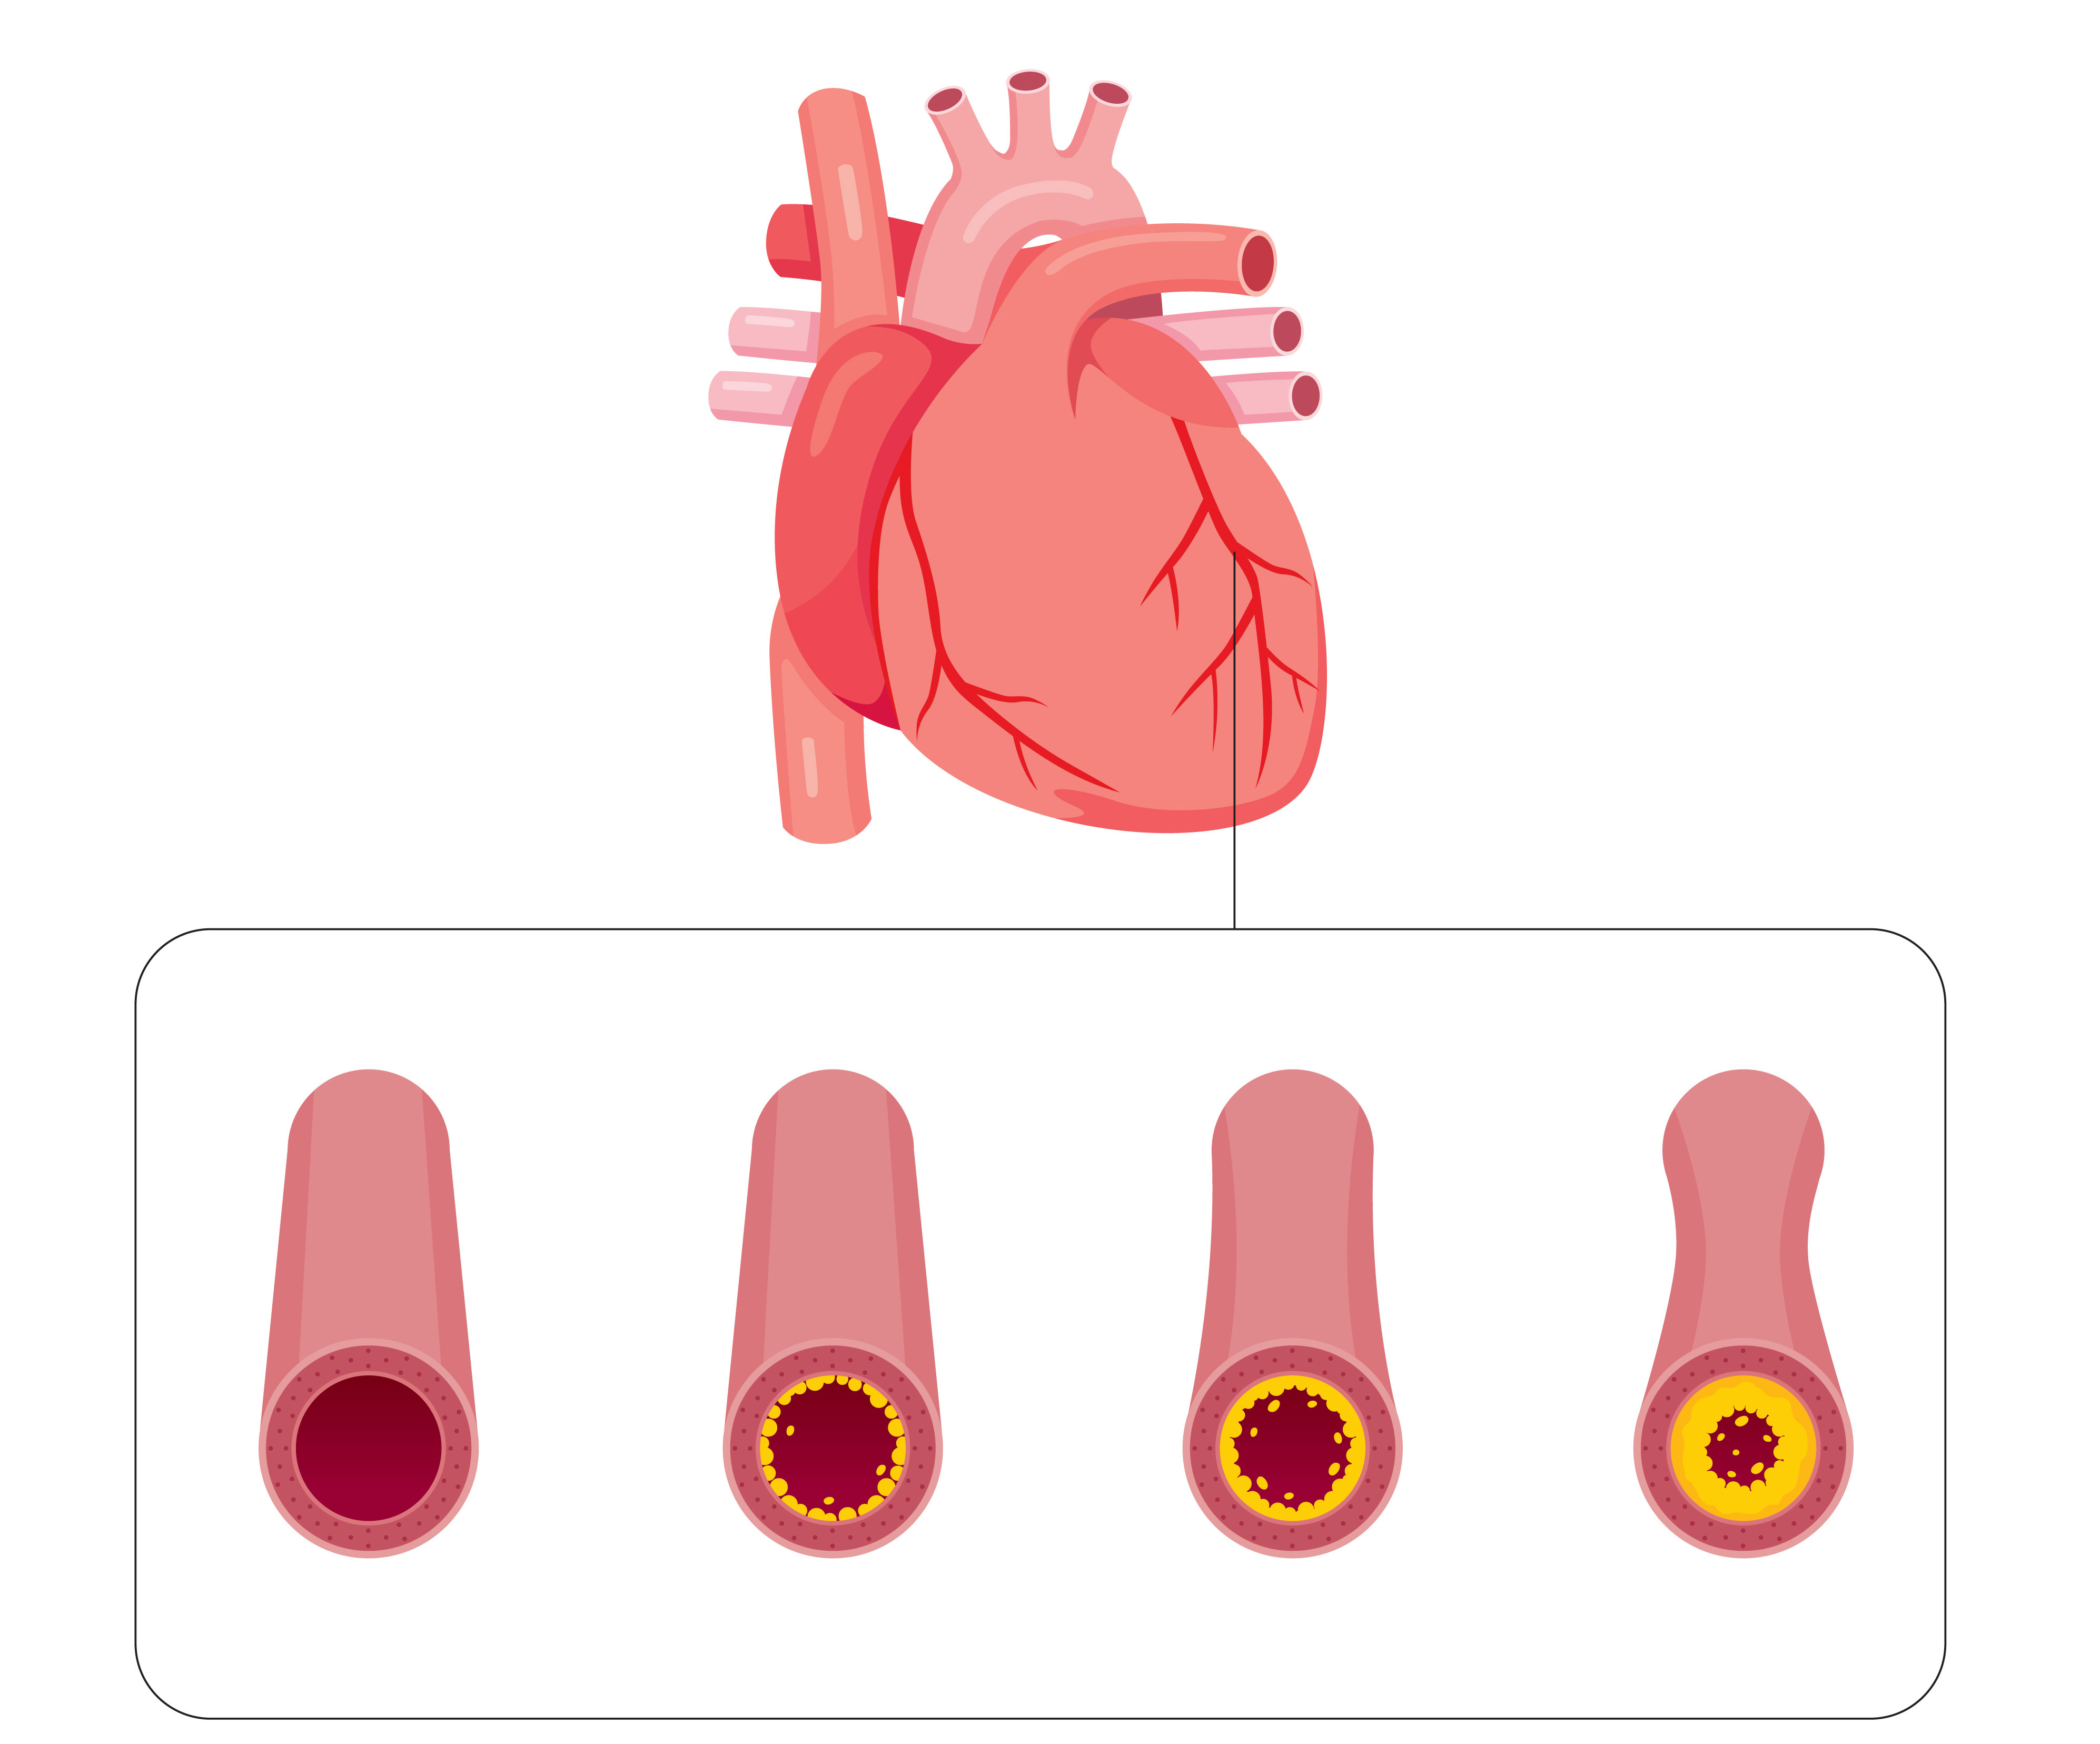 Picture showing Narrowing Or Blockage Of Coronary Arteries, Condition Caused By Build-up Of Cholesterol And Fatty